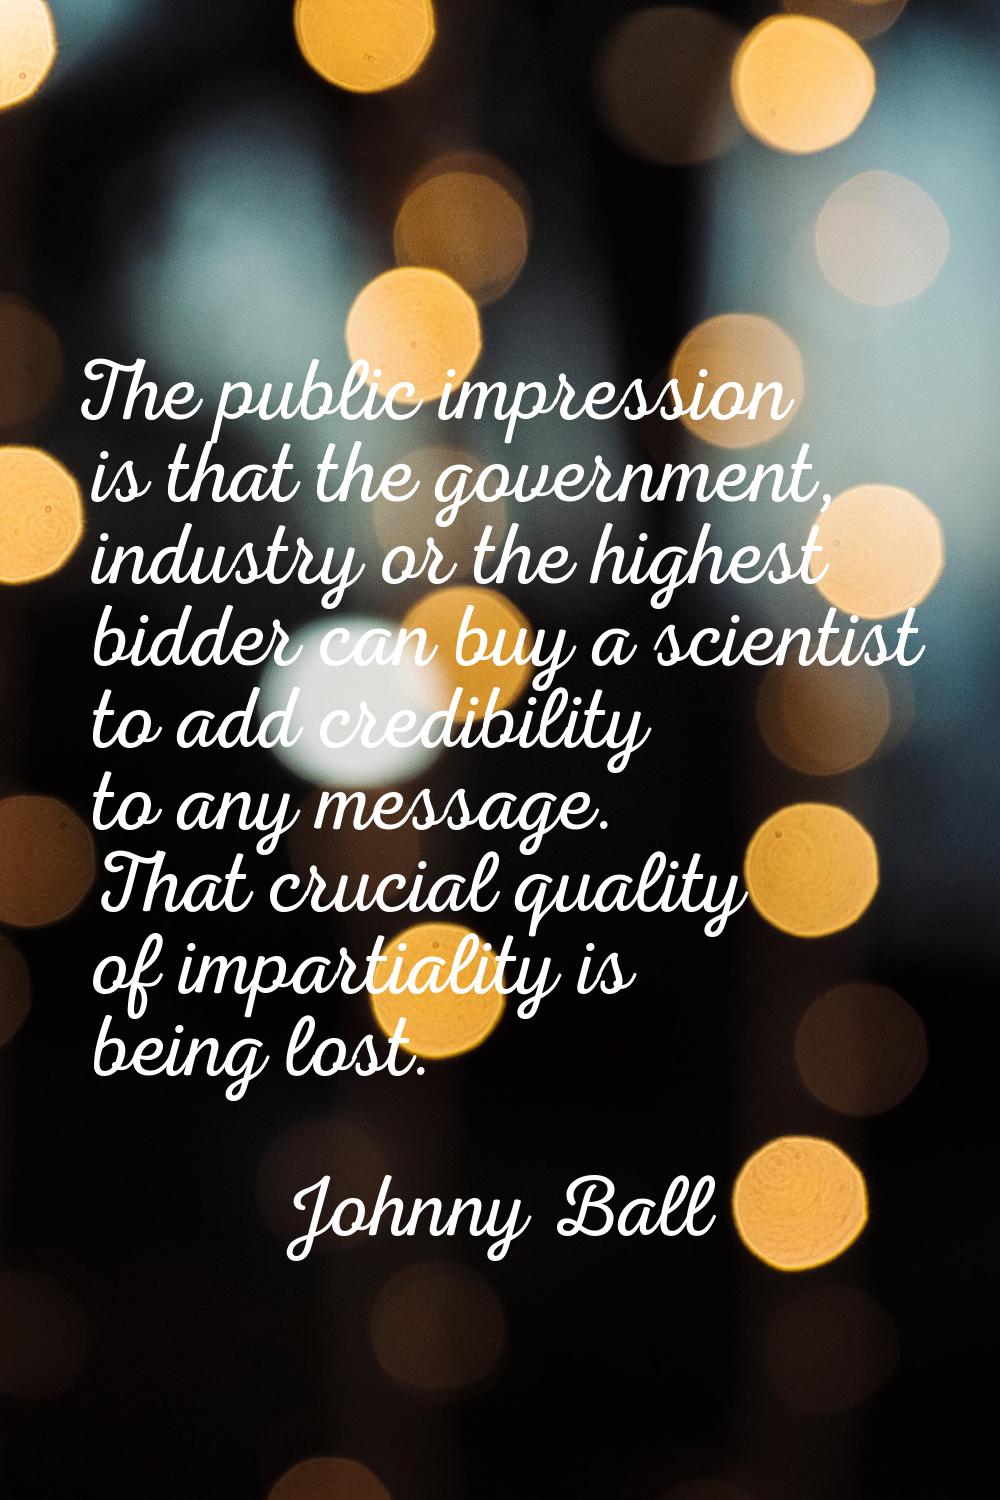 The public impression is that the government, industry or the highest bidder can buy a scientist to